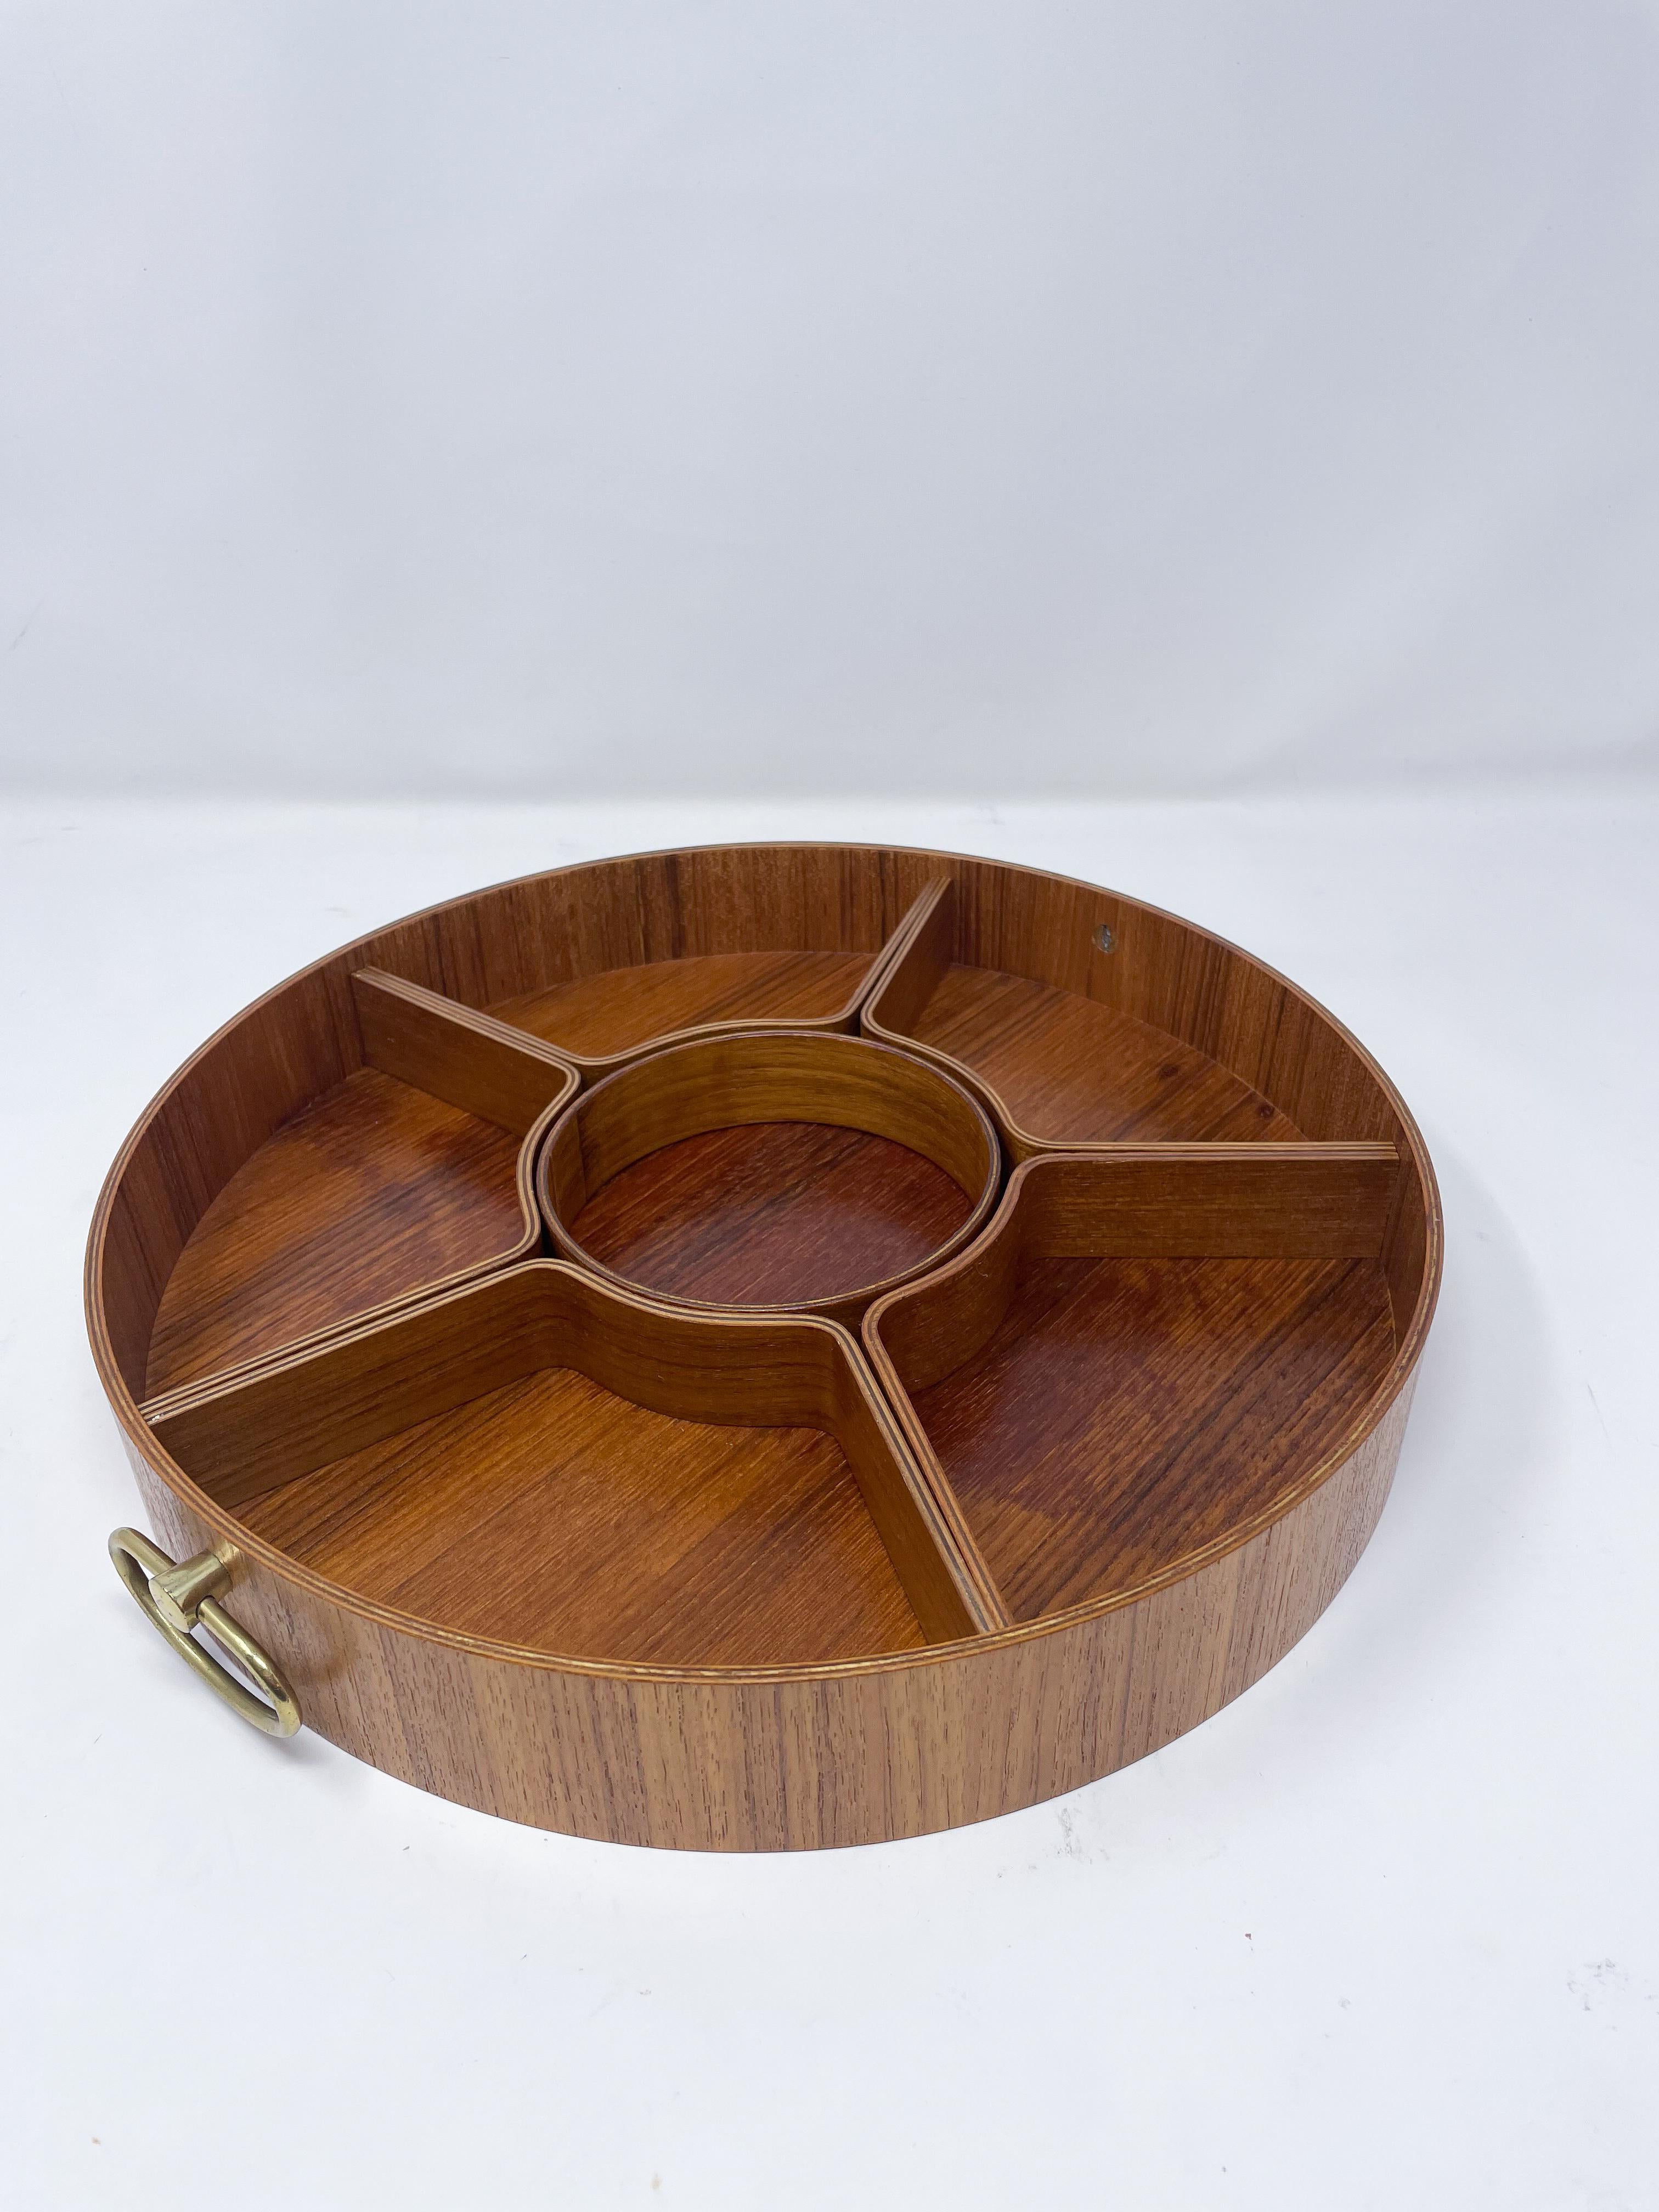 Mid-Century Modern Scandinavian wooden box, 1960s

Small wooden box, with compartiments.